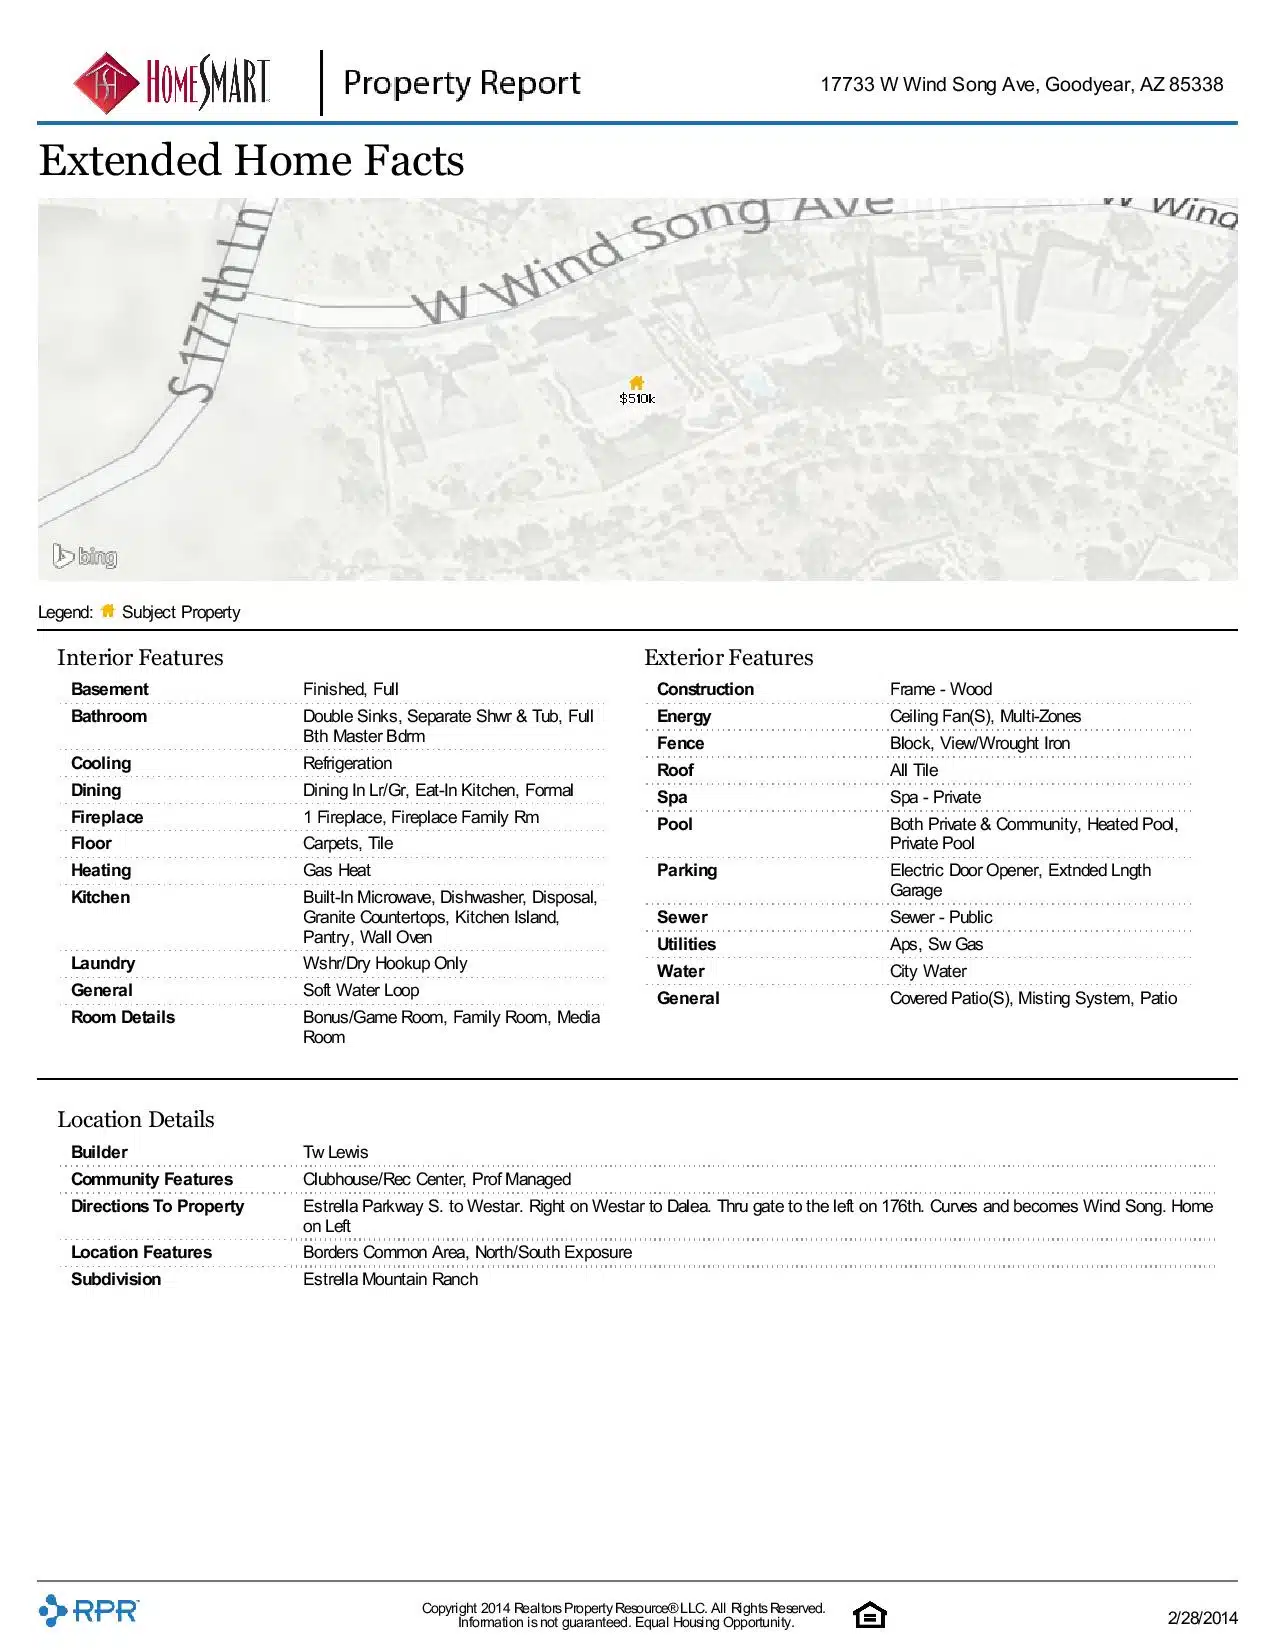 17733-W-Wind-Song-Ave-Goodyear-AZ-85338-page-004